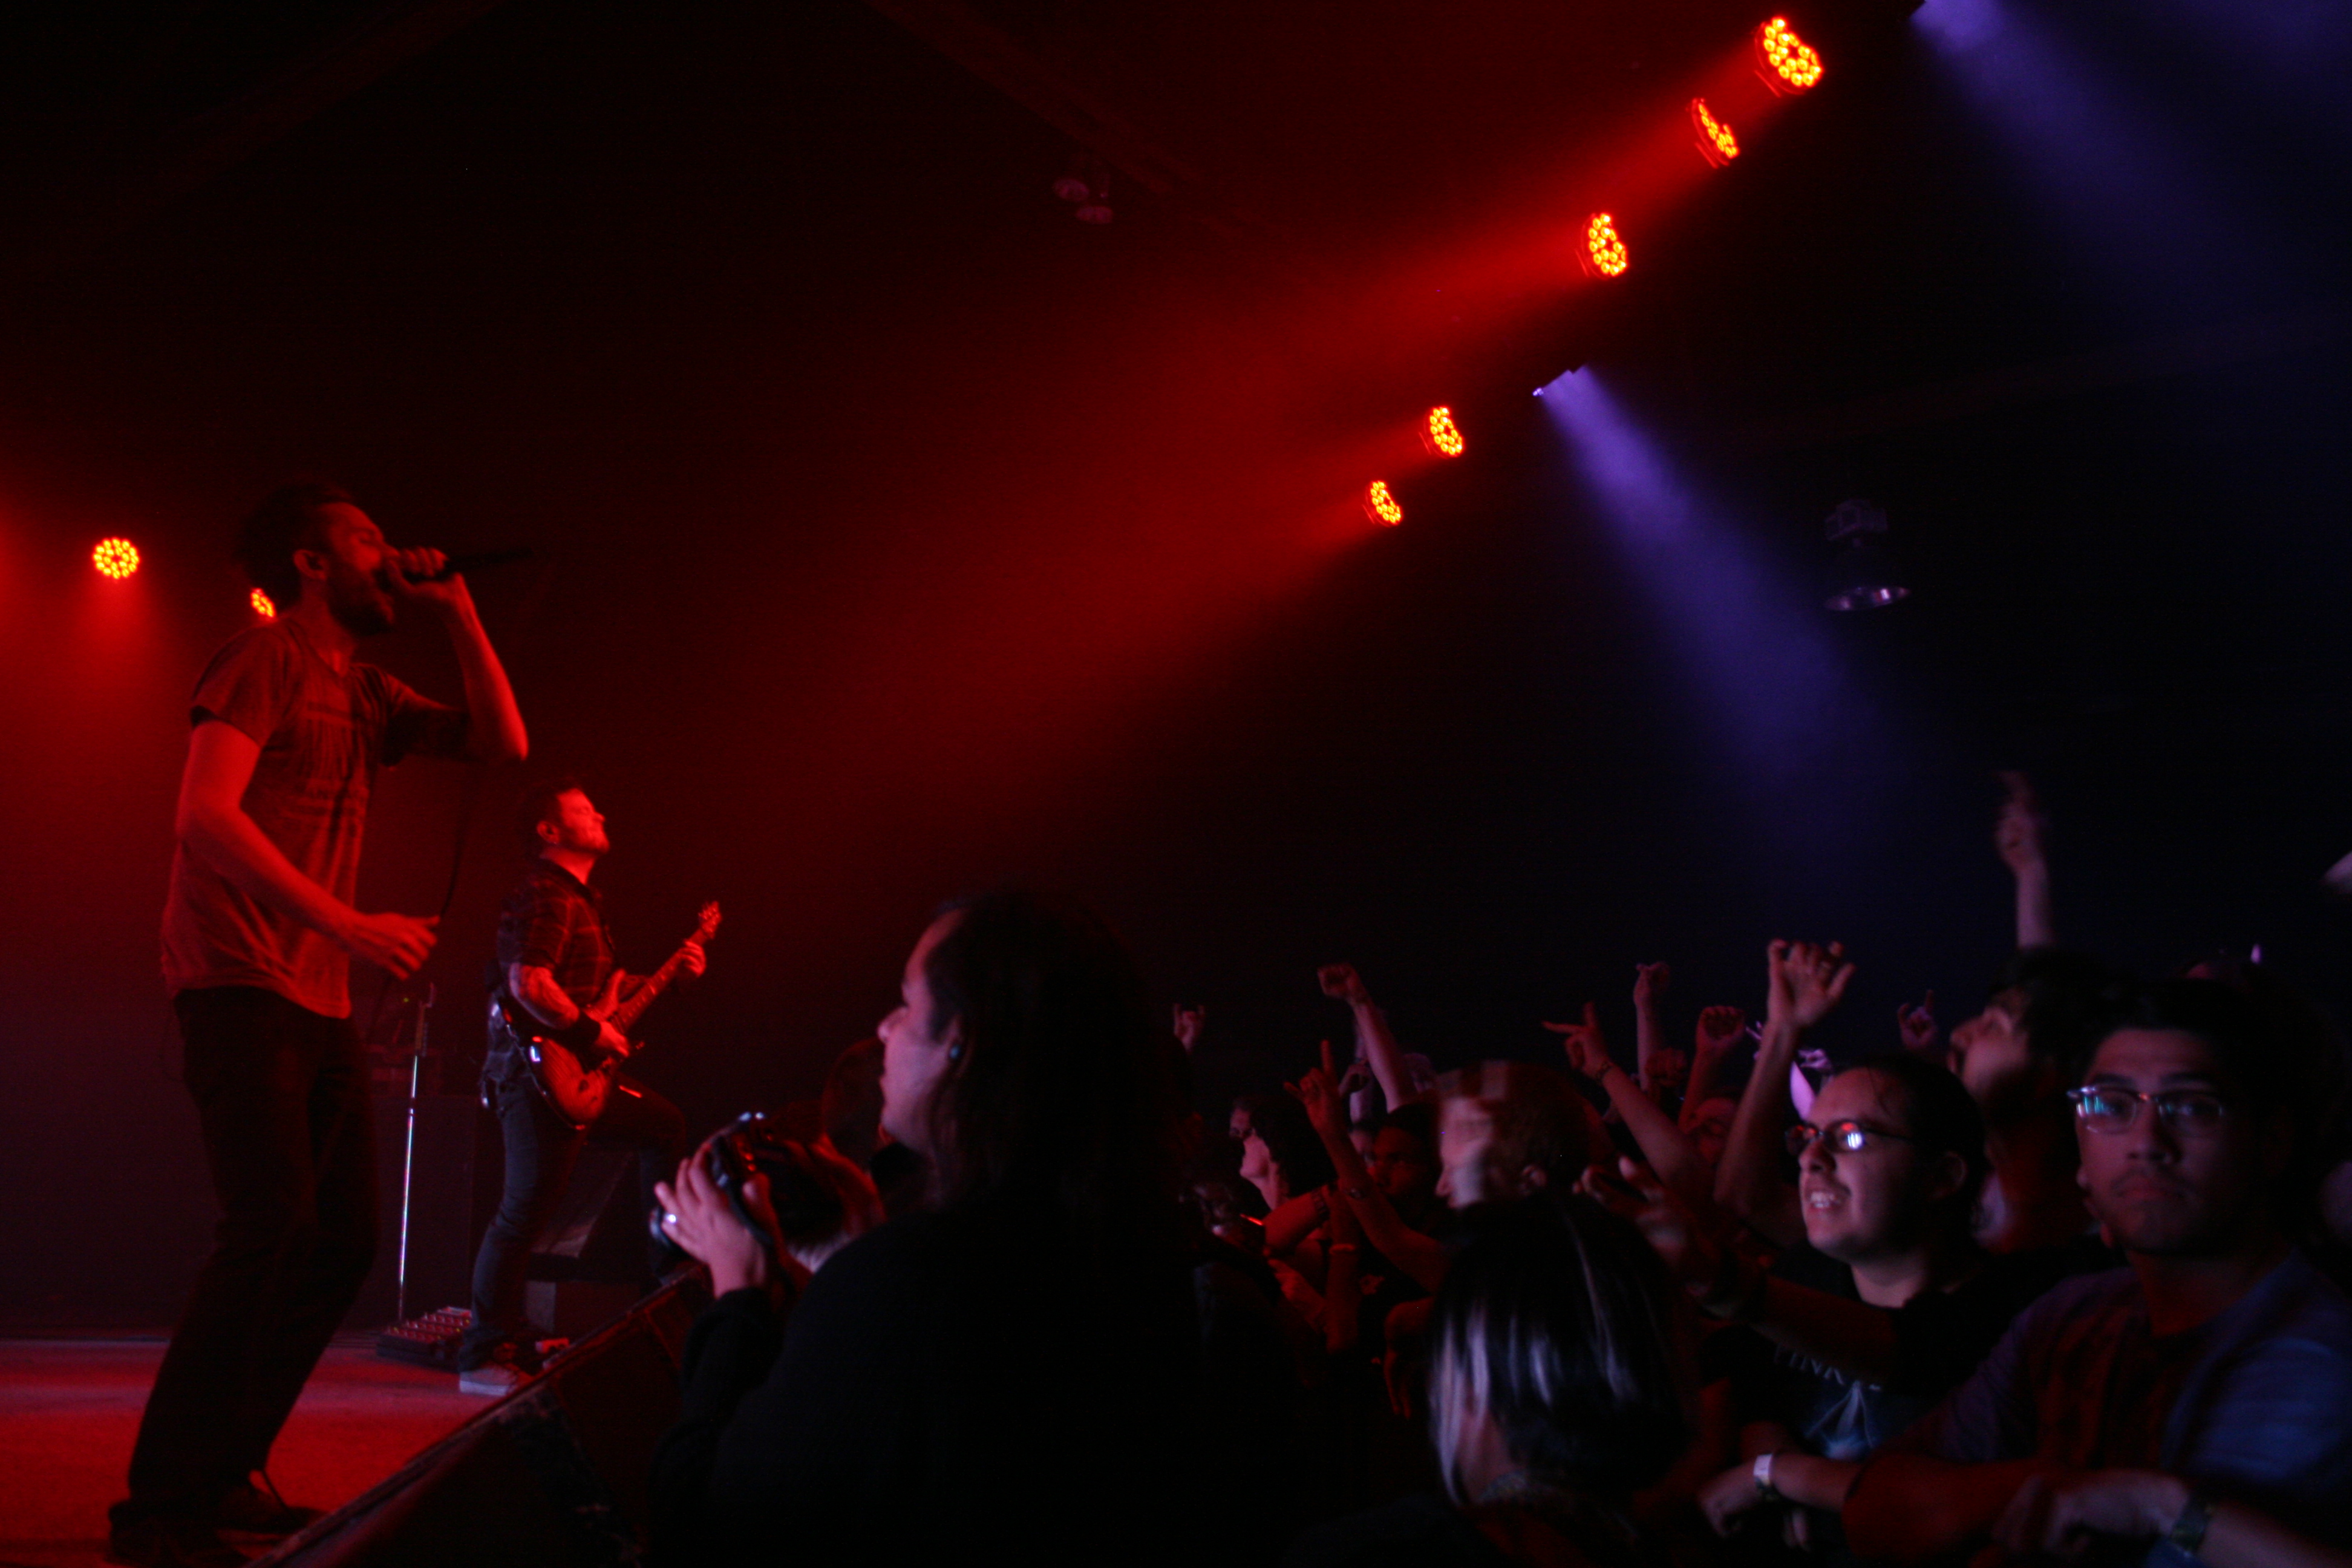 BTBAM and Deafheaven live at The Glass House 3/12/14